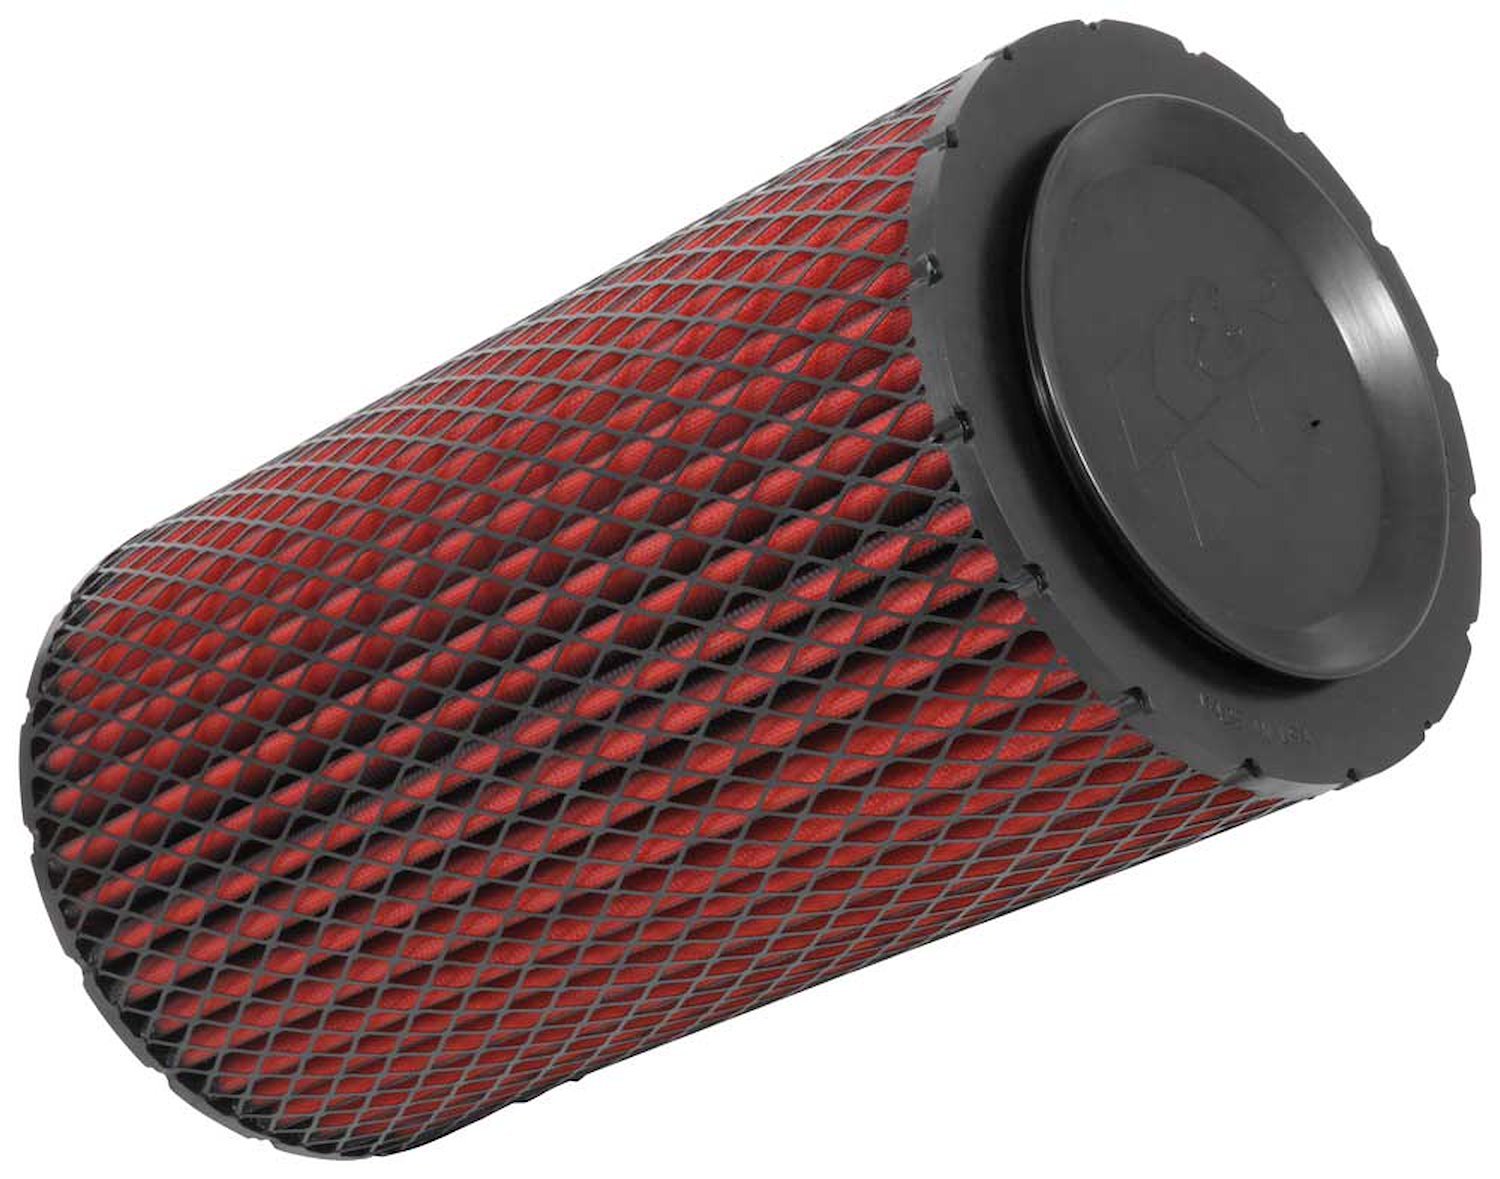 Standard-Flow Heavy-Duty Air Filter For Trucks, RVs & Agricultural Equipment